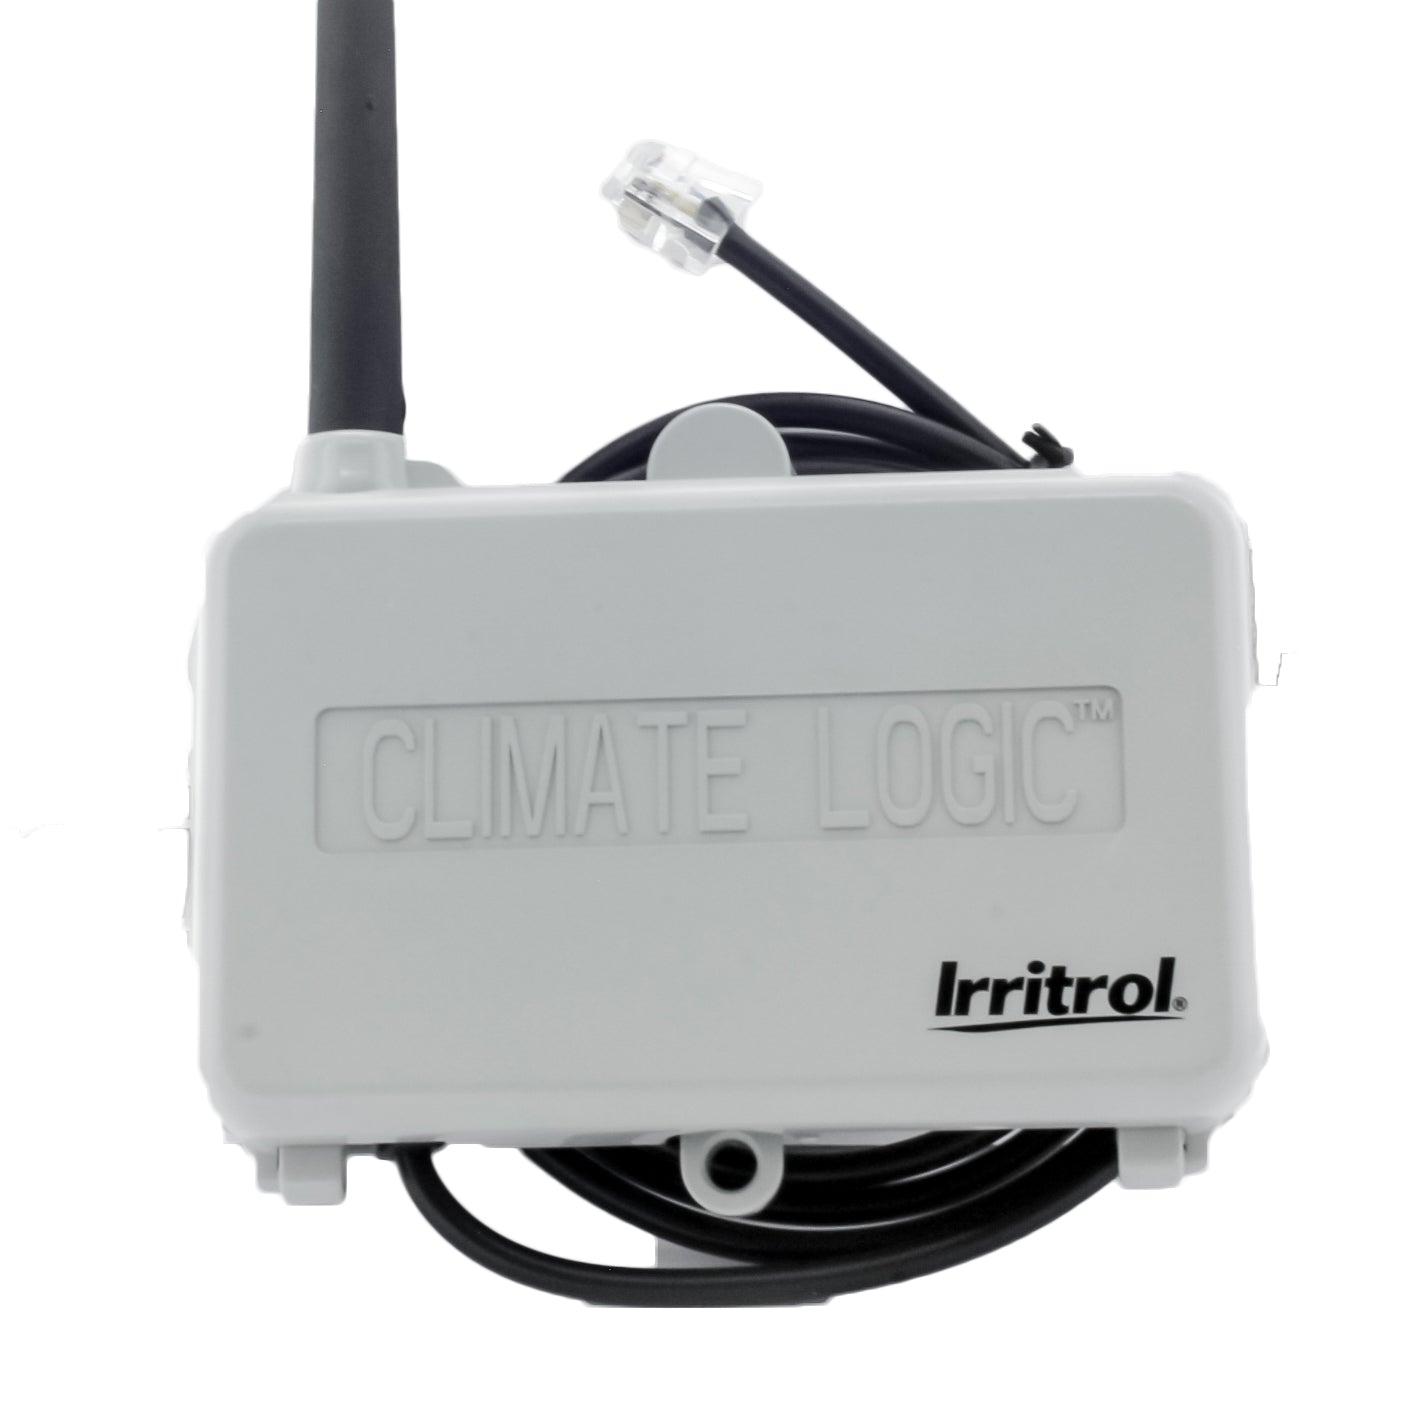 Irritrol - CL-M1 - Climate Logic (Receiver Module Only)